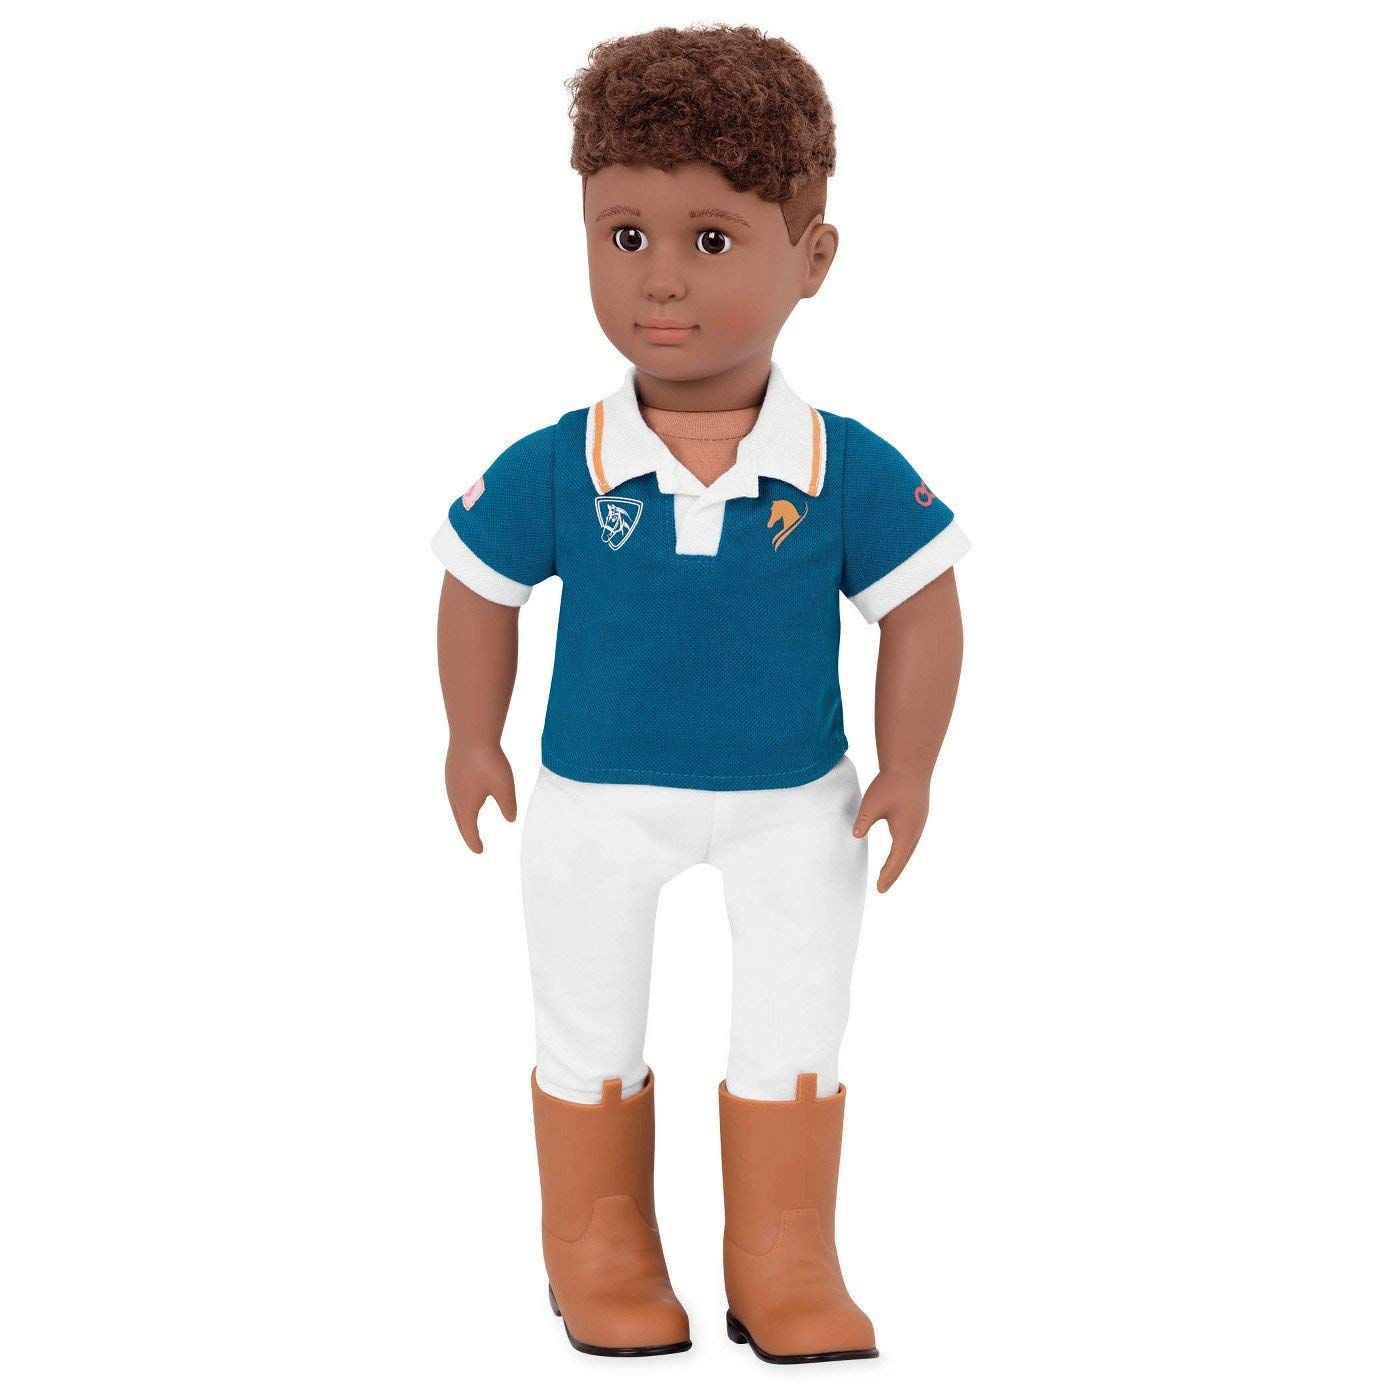  Boy Doll, African American With Riding Outfit - Tyler 